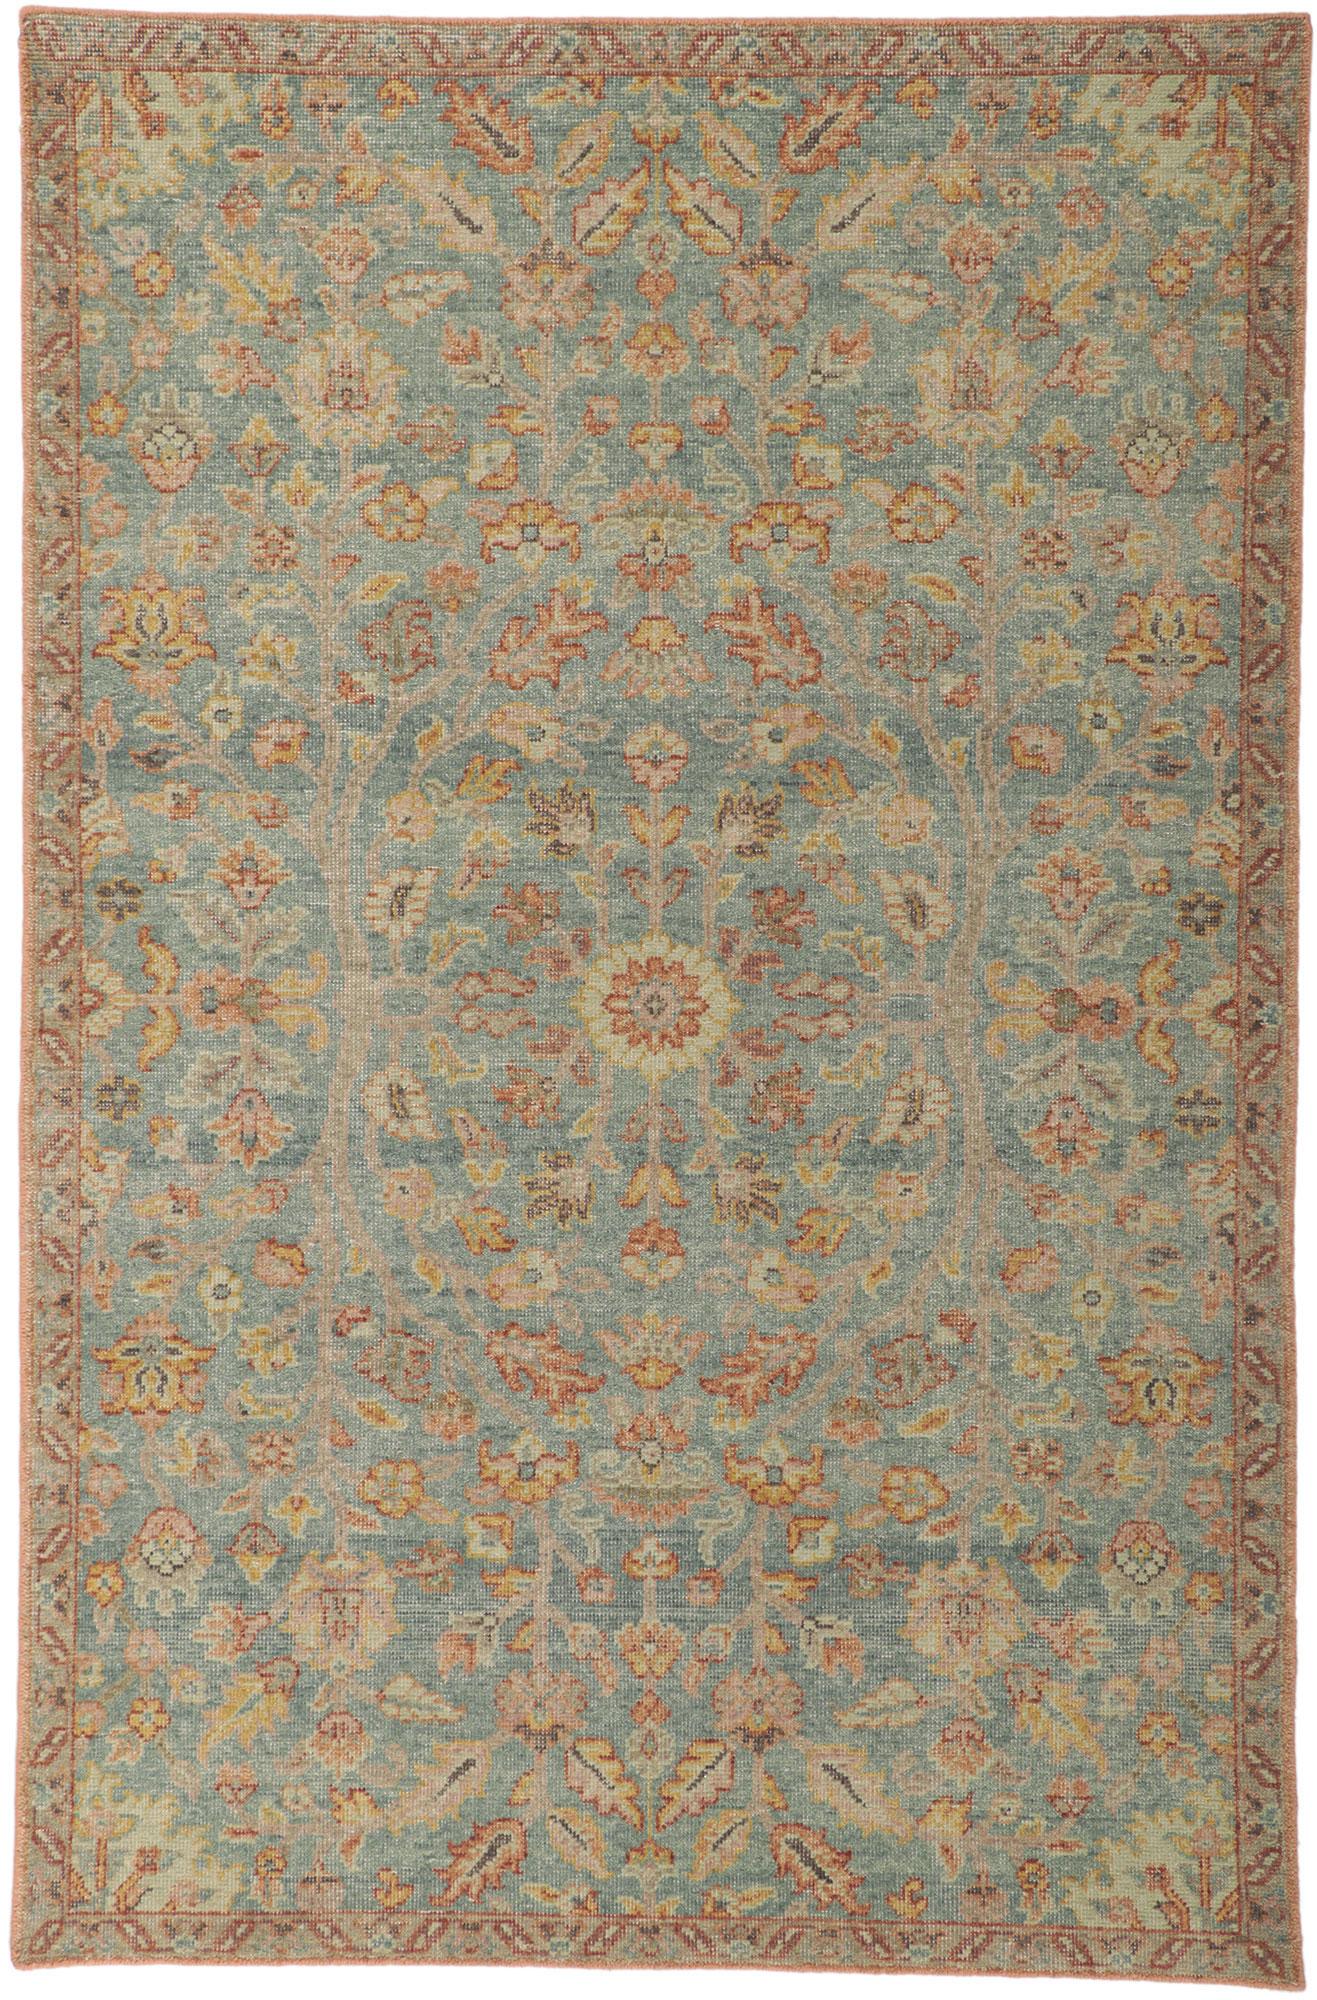 Wool New Vintage-Style Distressed Rug with Soft Earth-Tone Colors For Sale